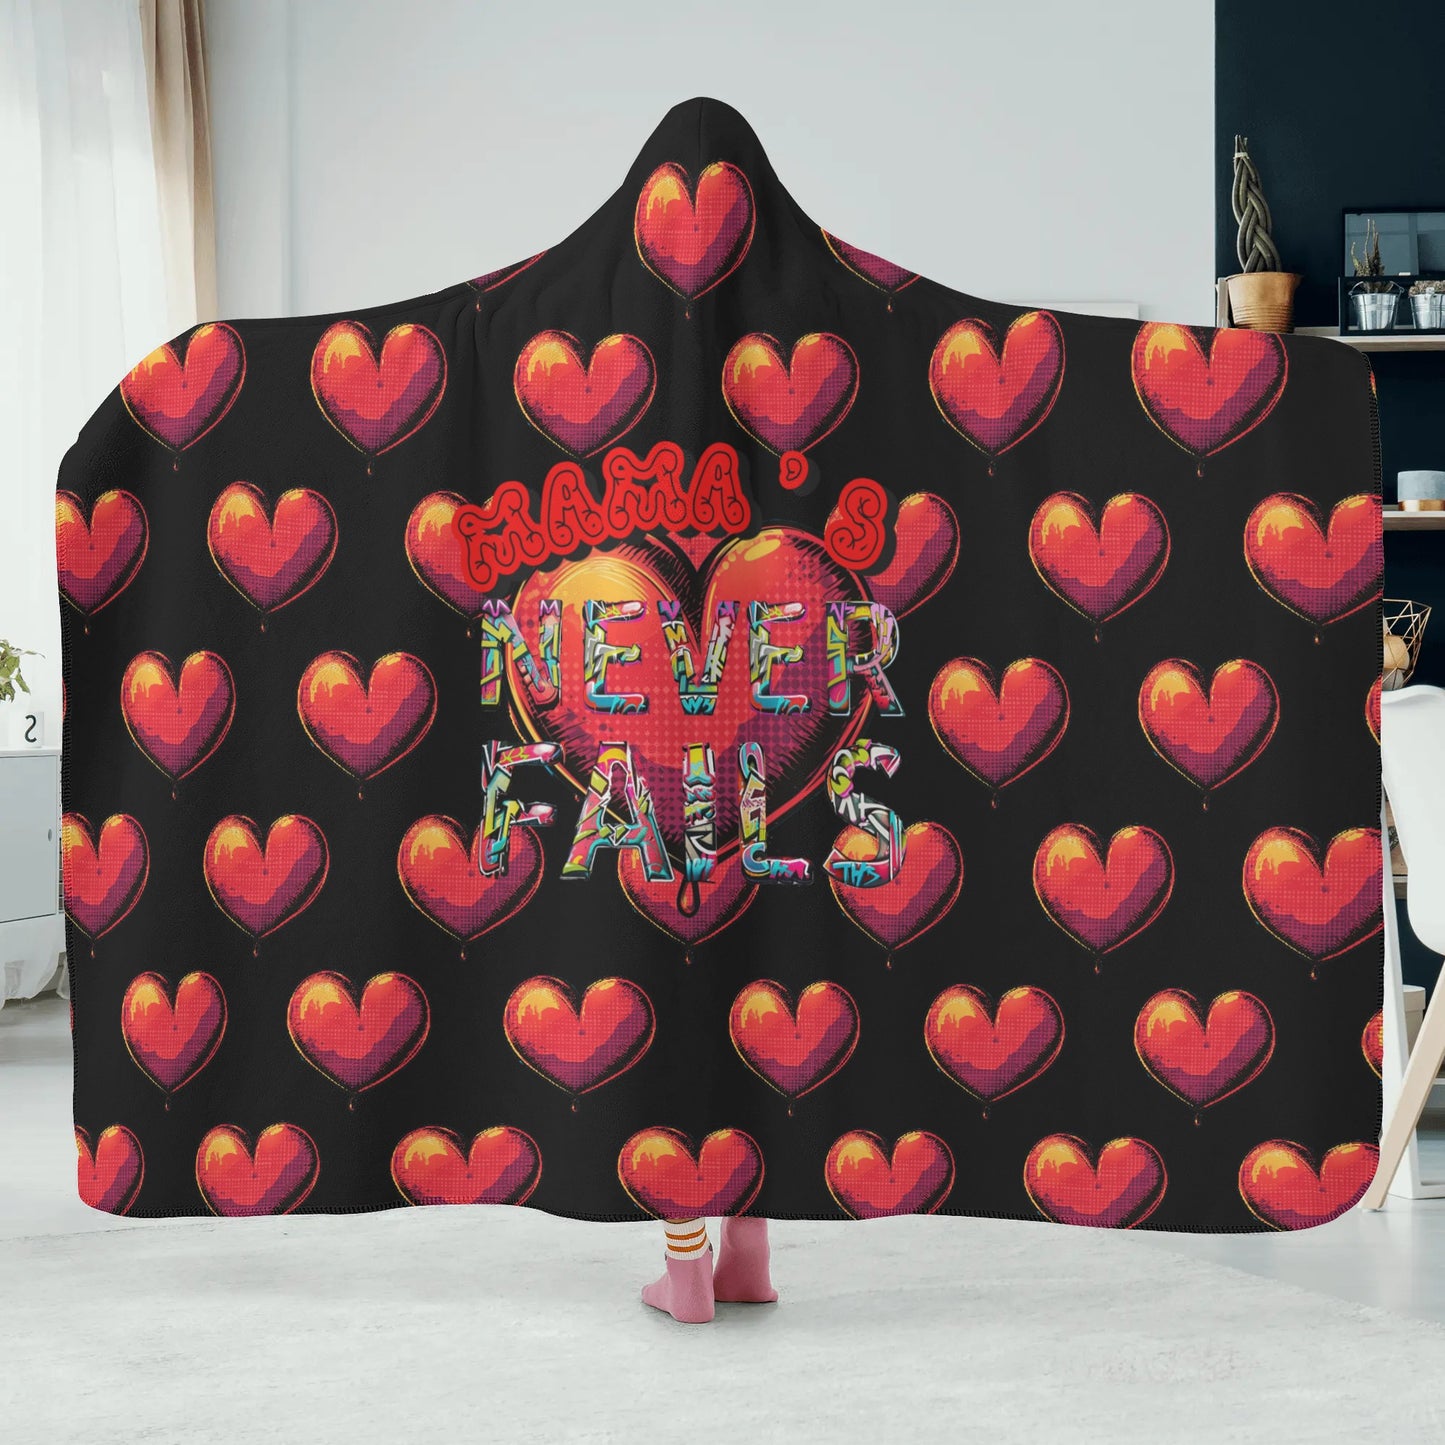 Mamas Love Never Fails- Hooded Blanket, Free Shipping